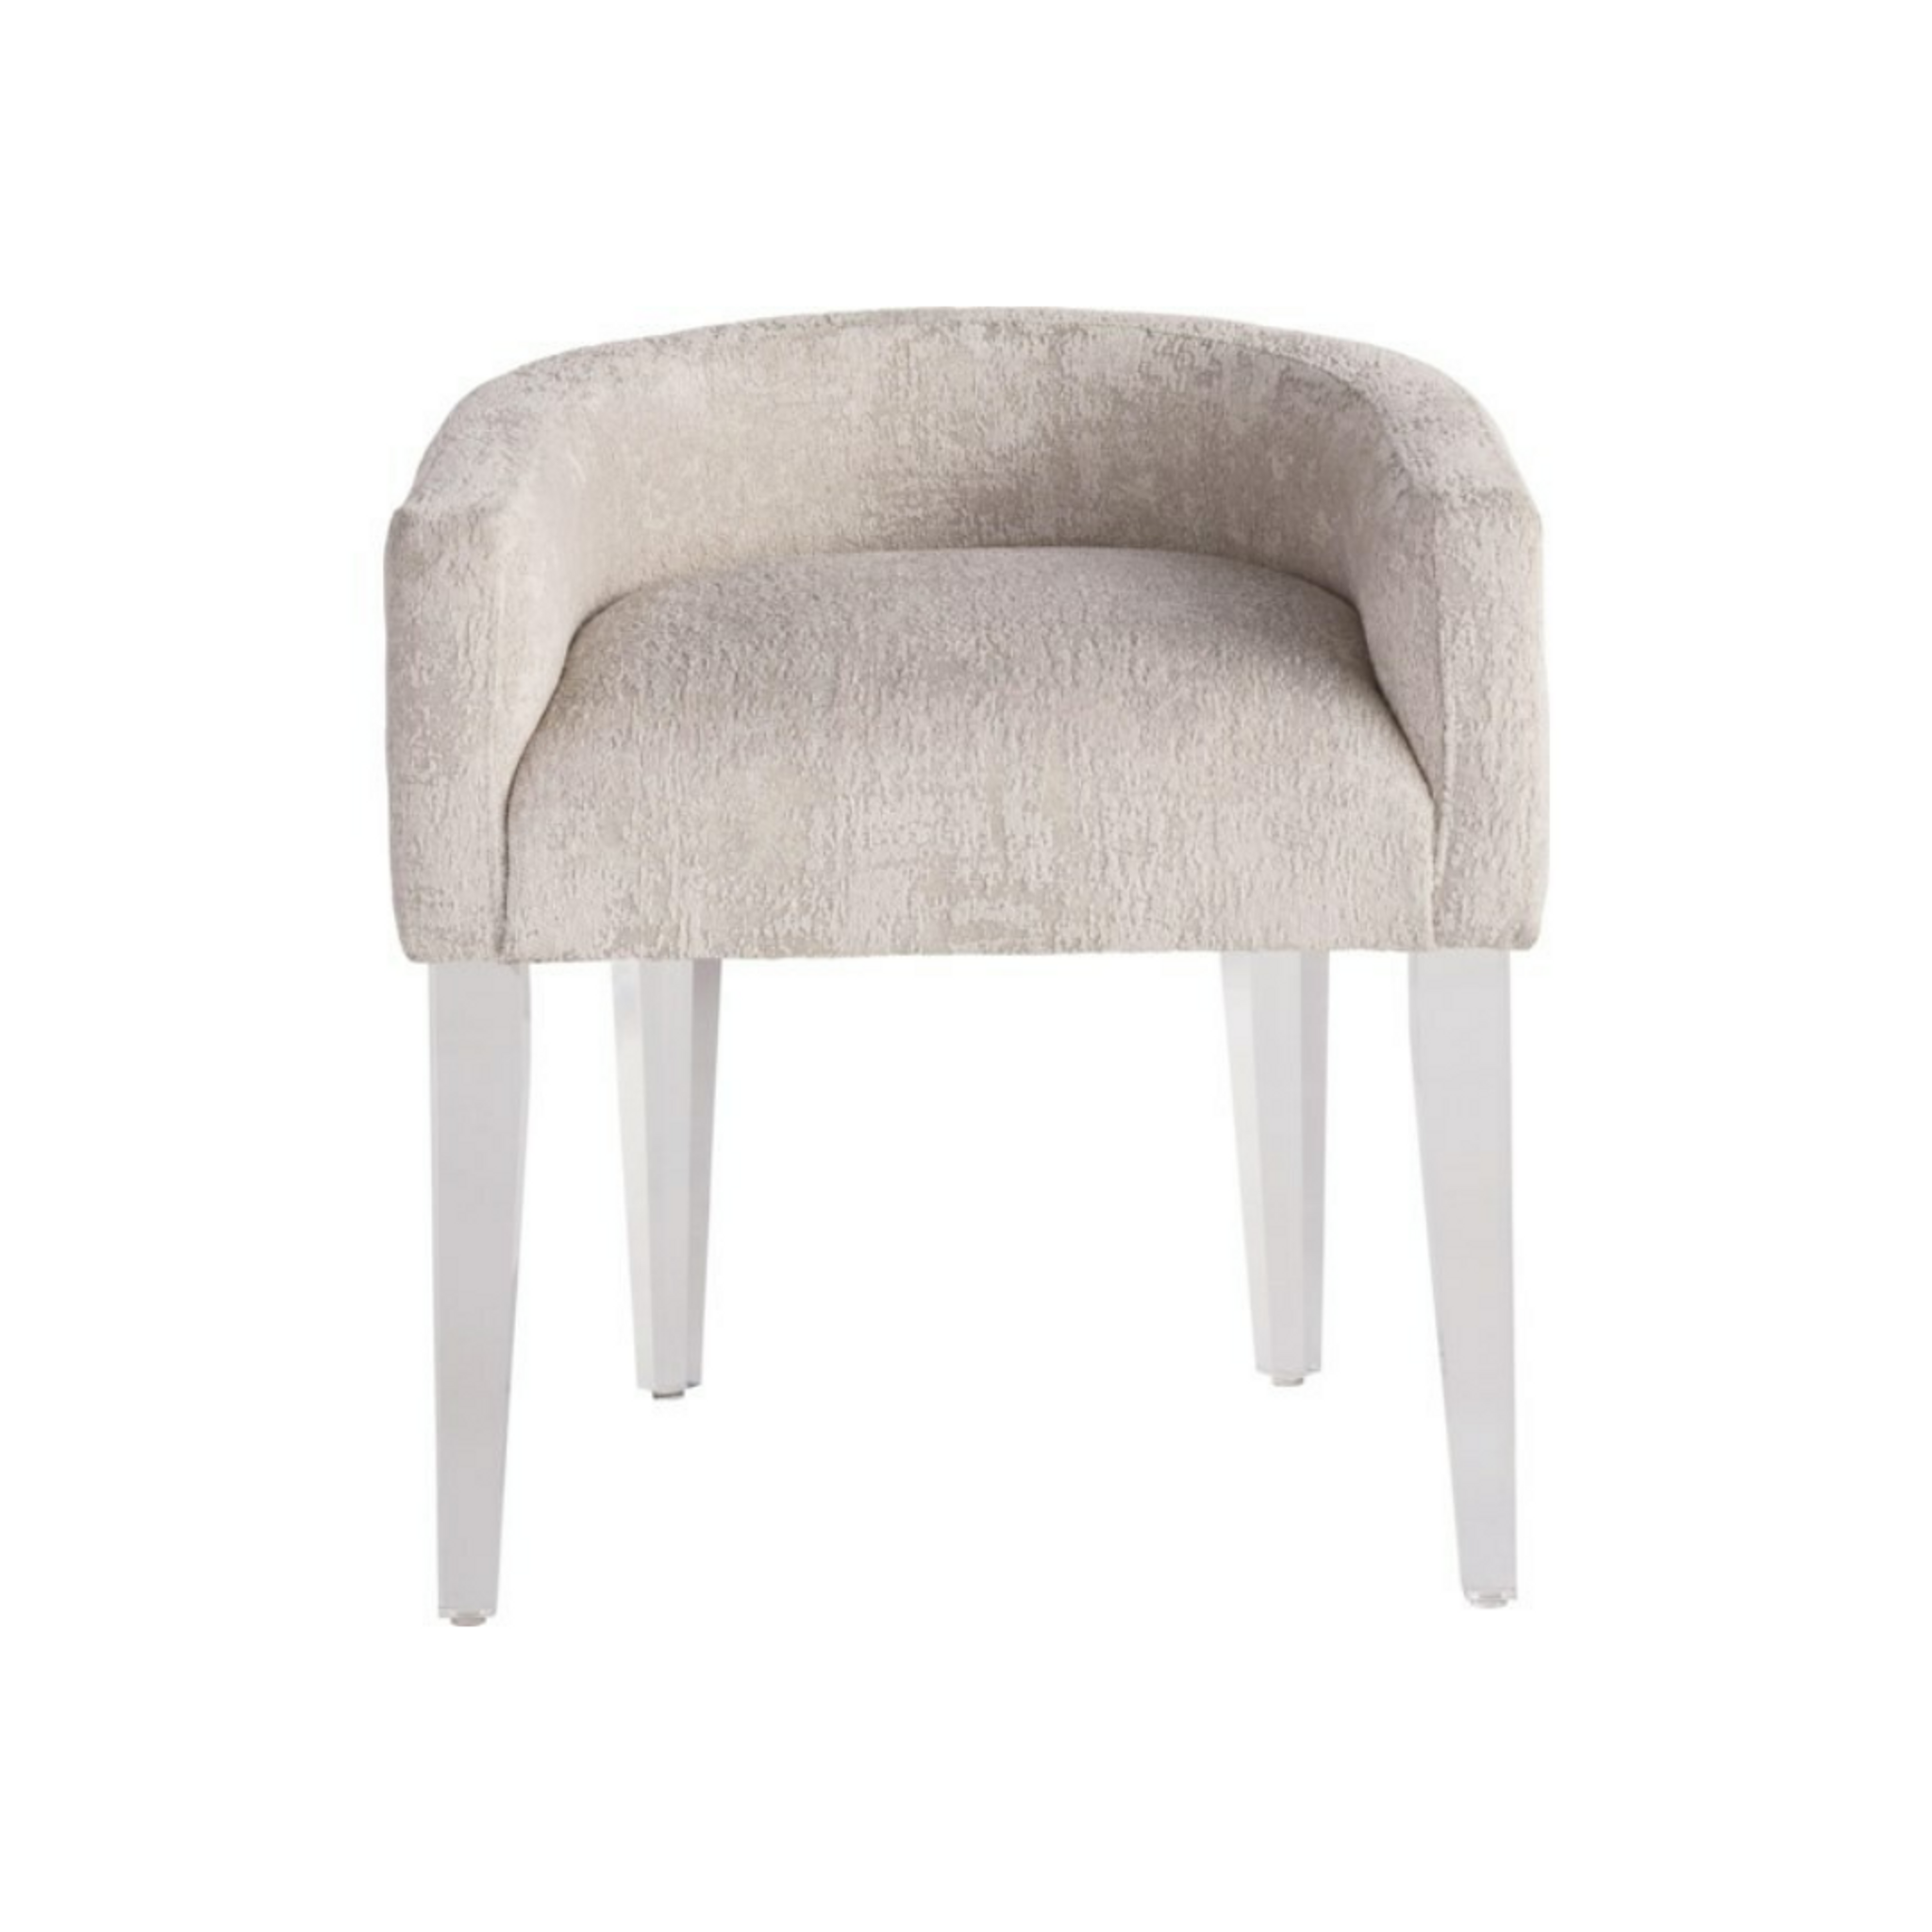 Upholstered Low Back Vanity Chair with Clear Legs (miranda kerr collec stool